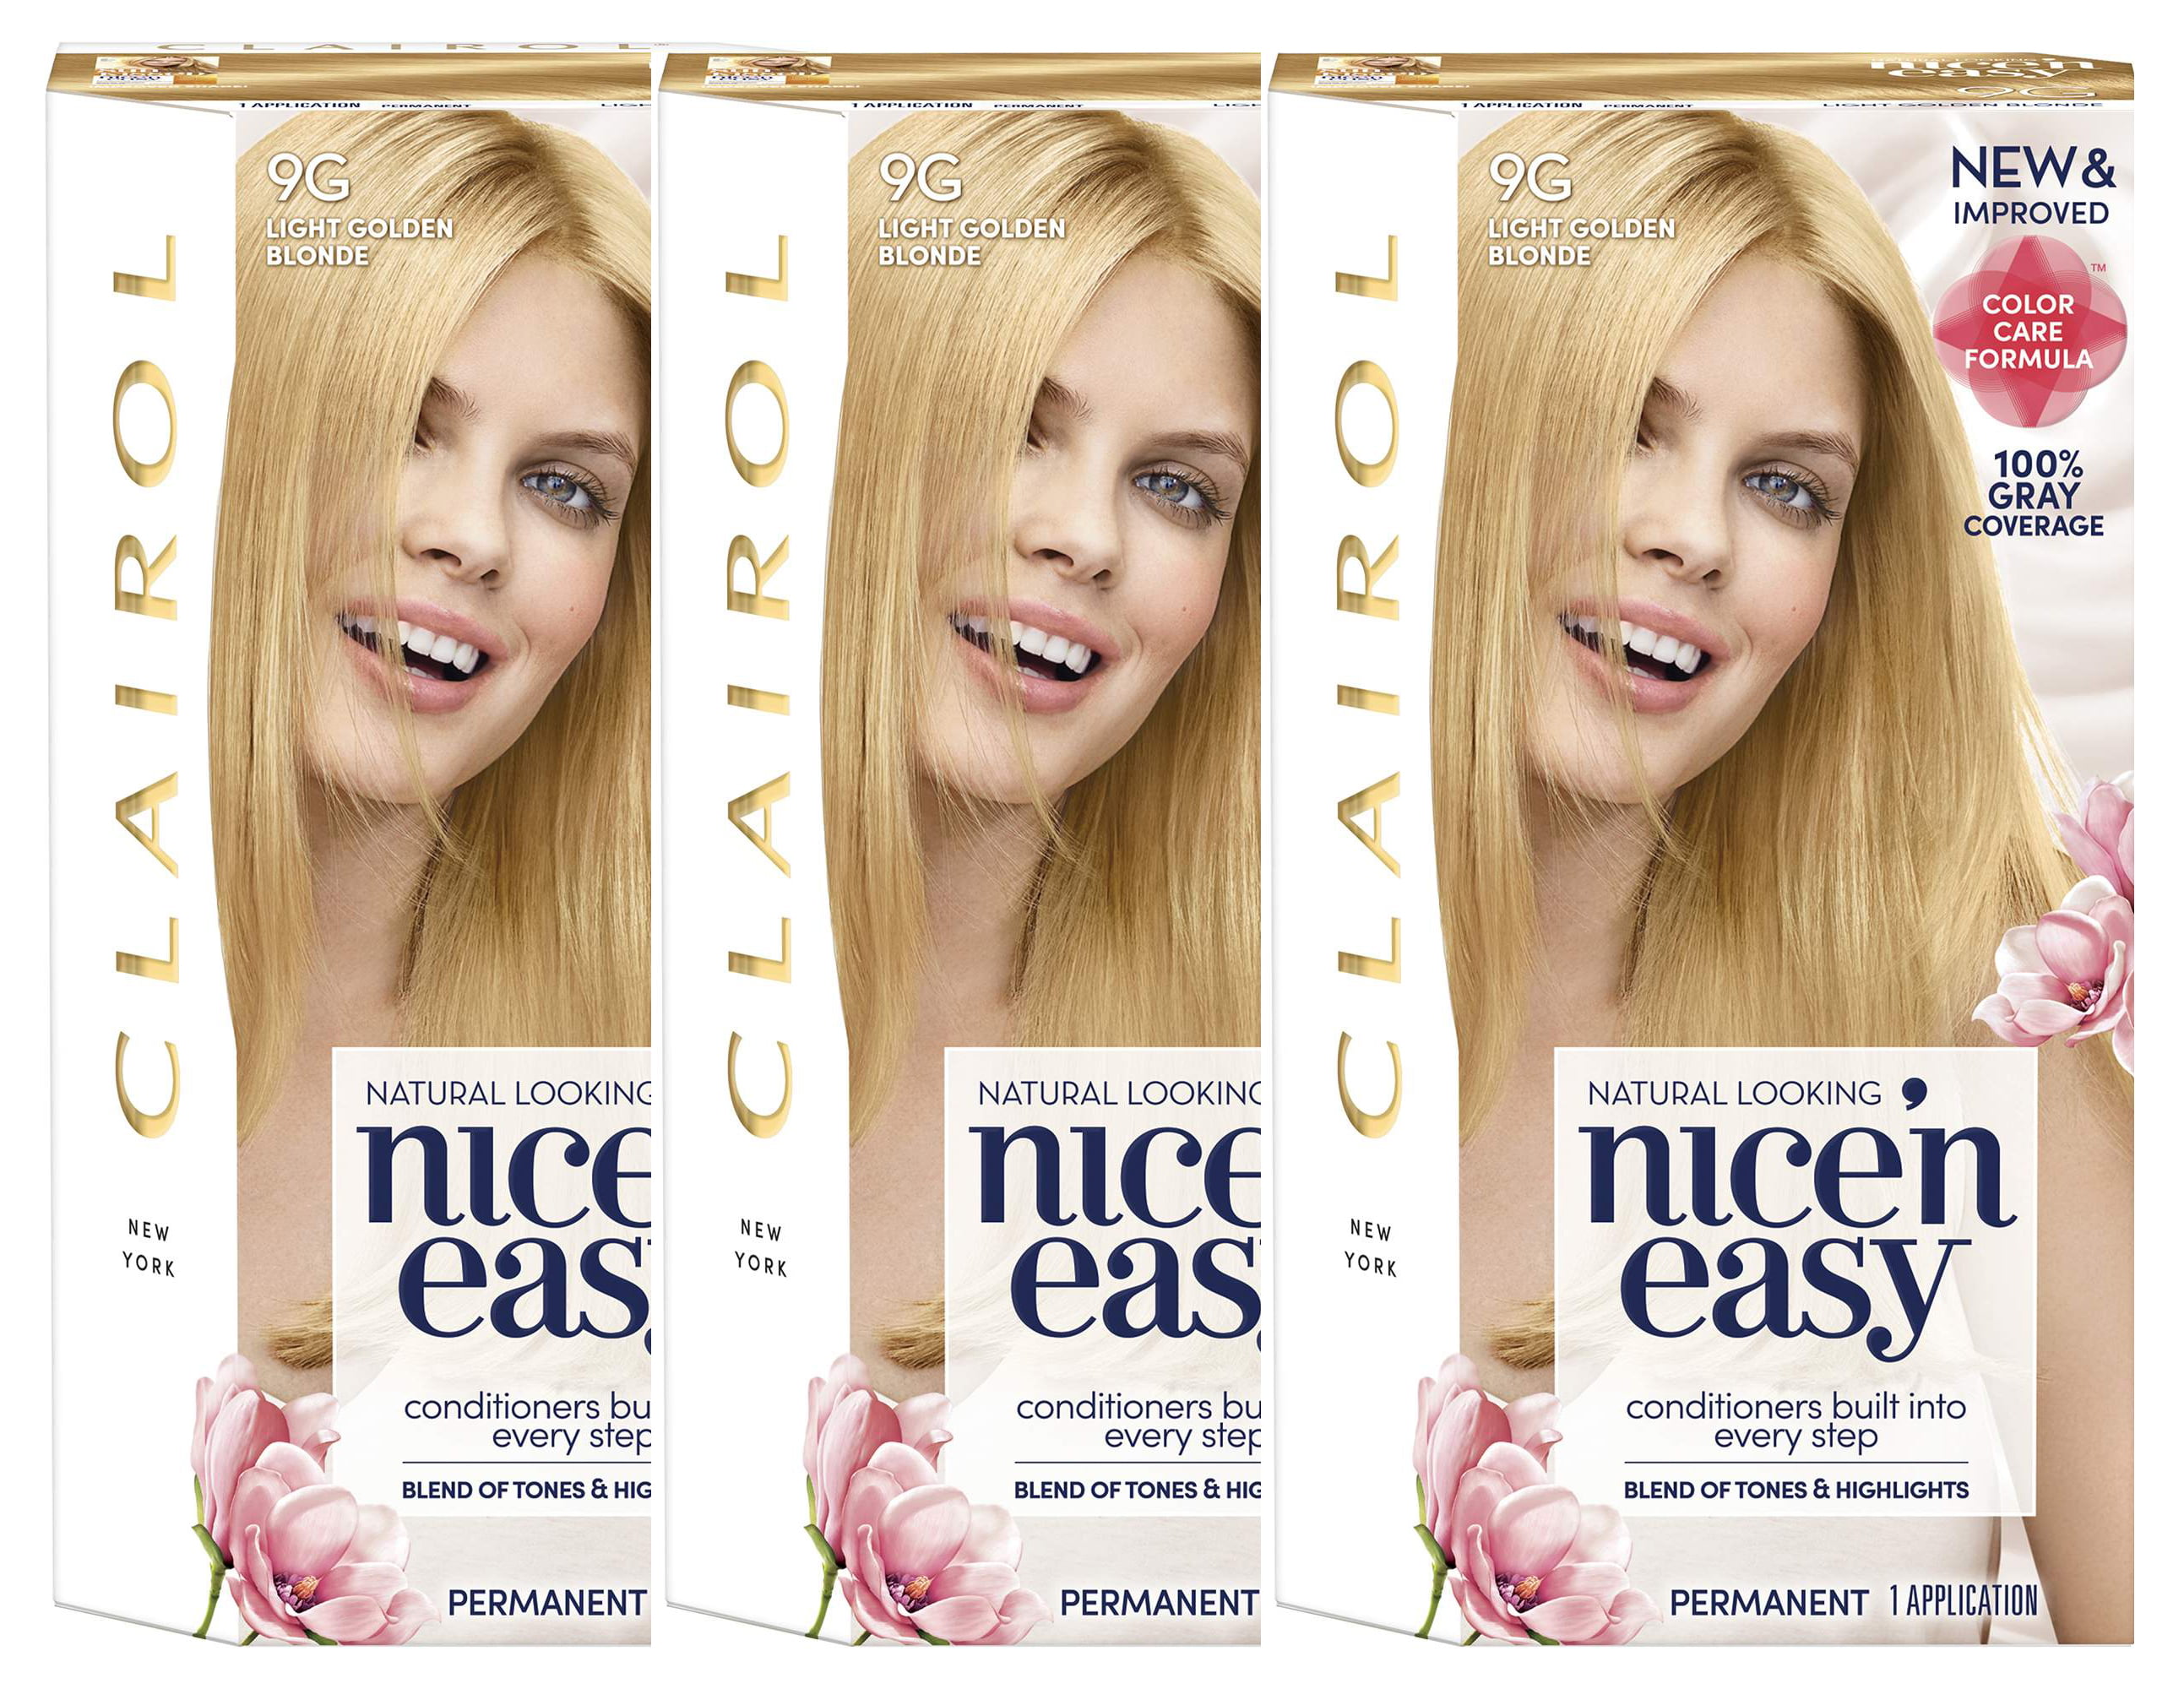 3. Clairol Nice'n Easy Permanent Hair Color, 9G Light Golden Blonde - wide 2